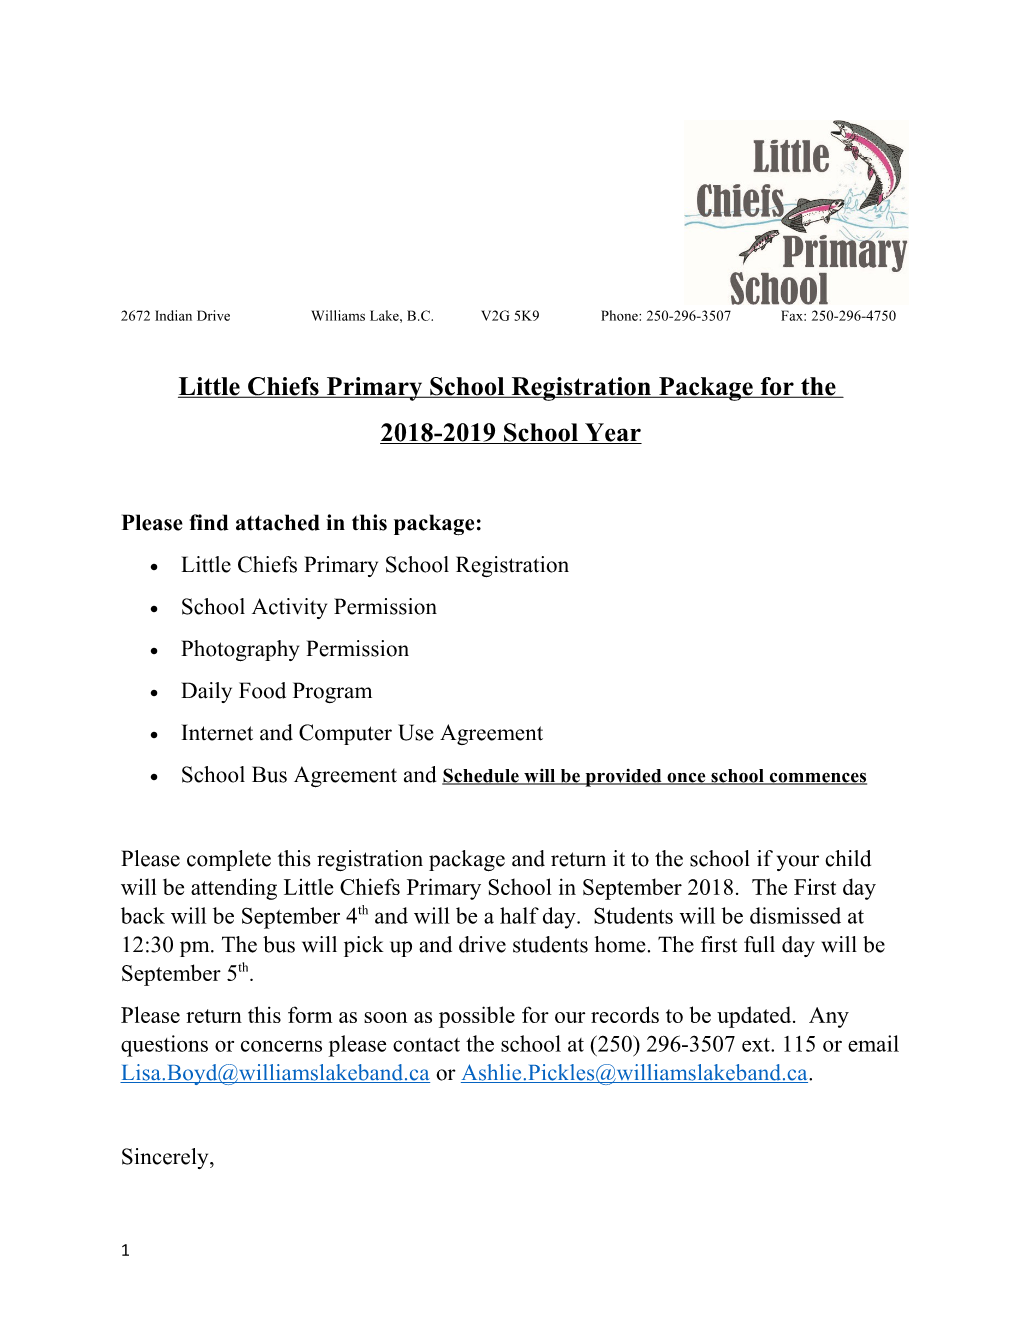 Little Chiefs Primary School Registration Package for The